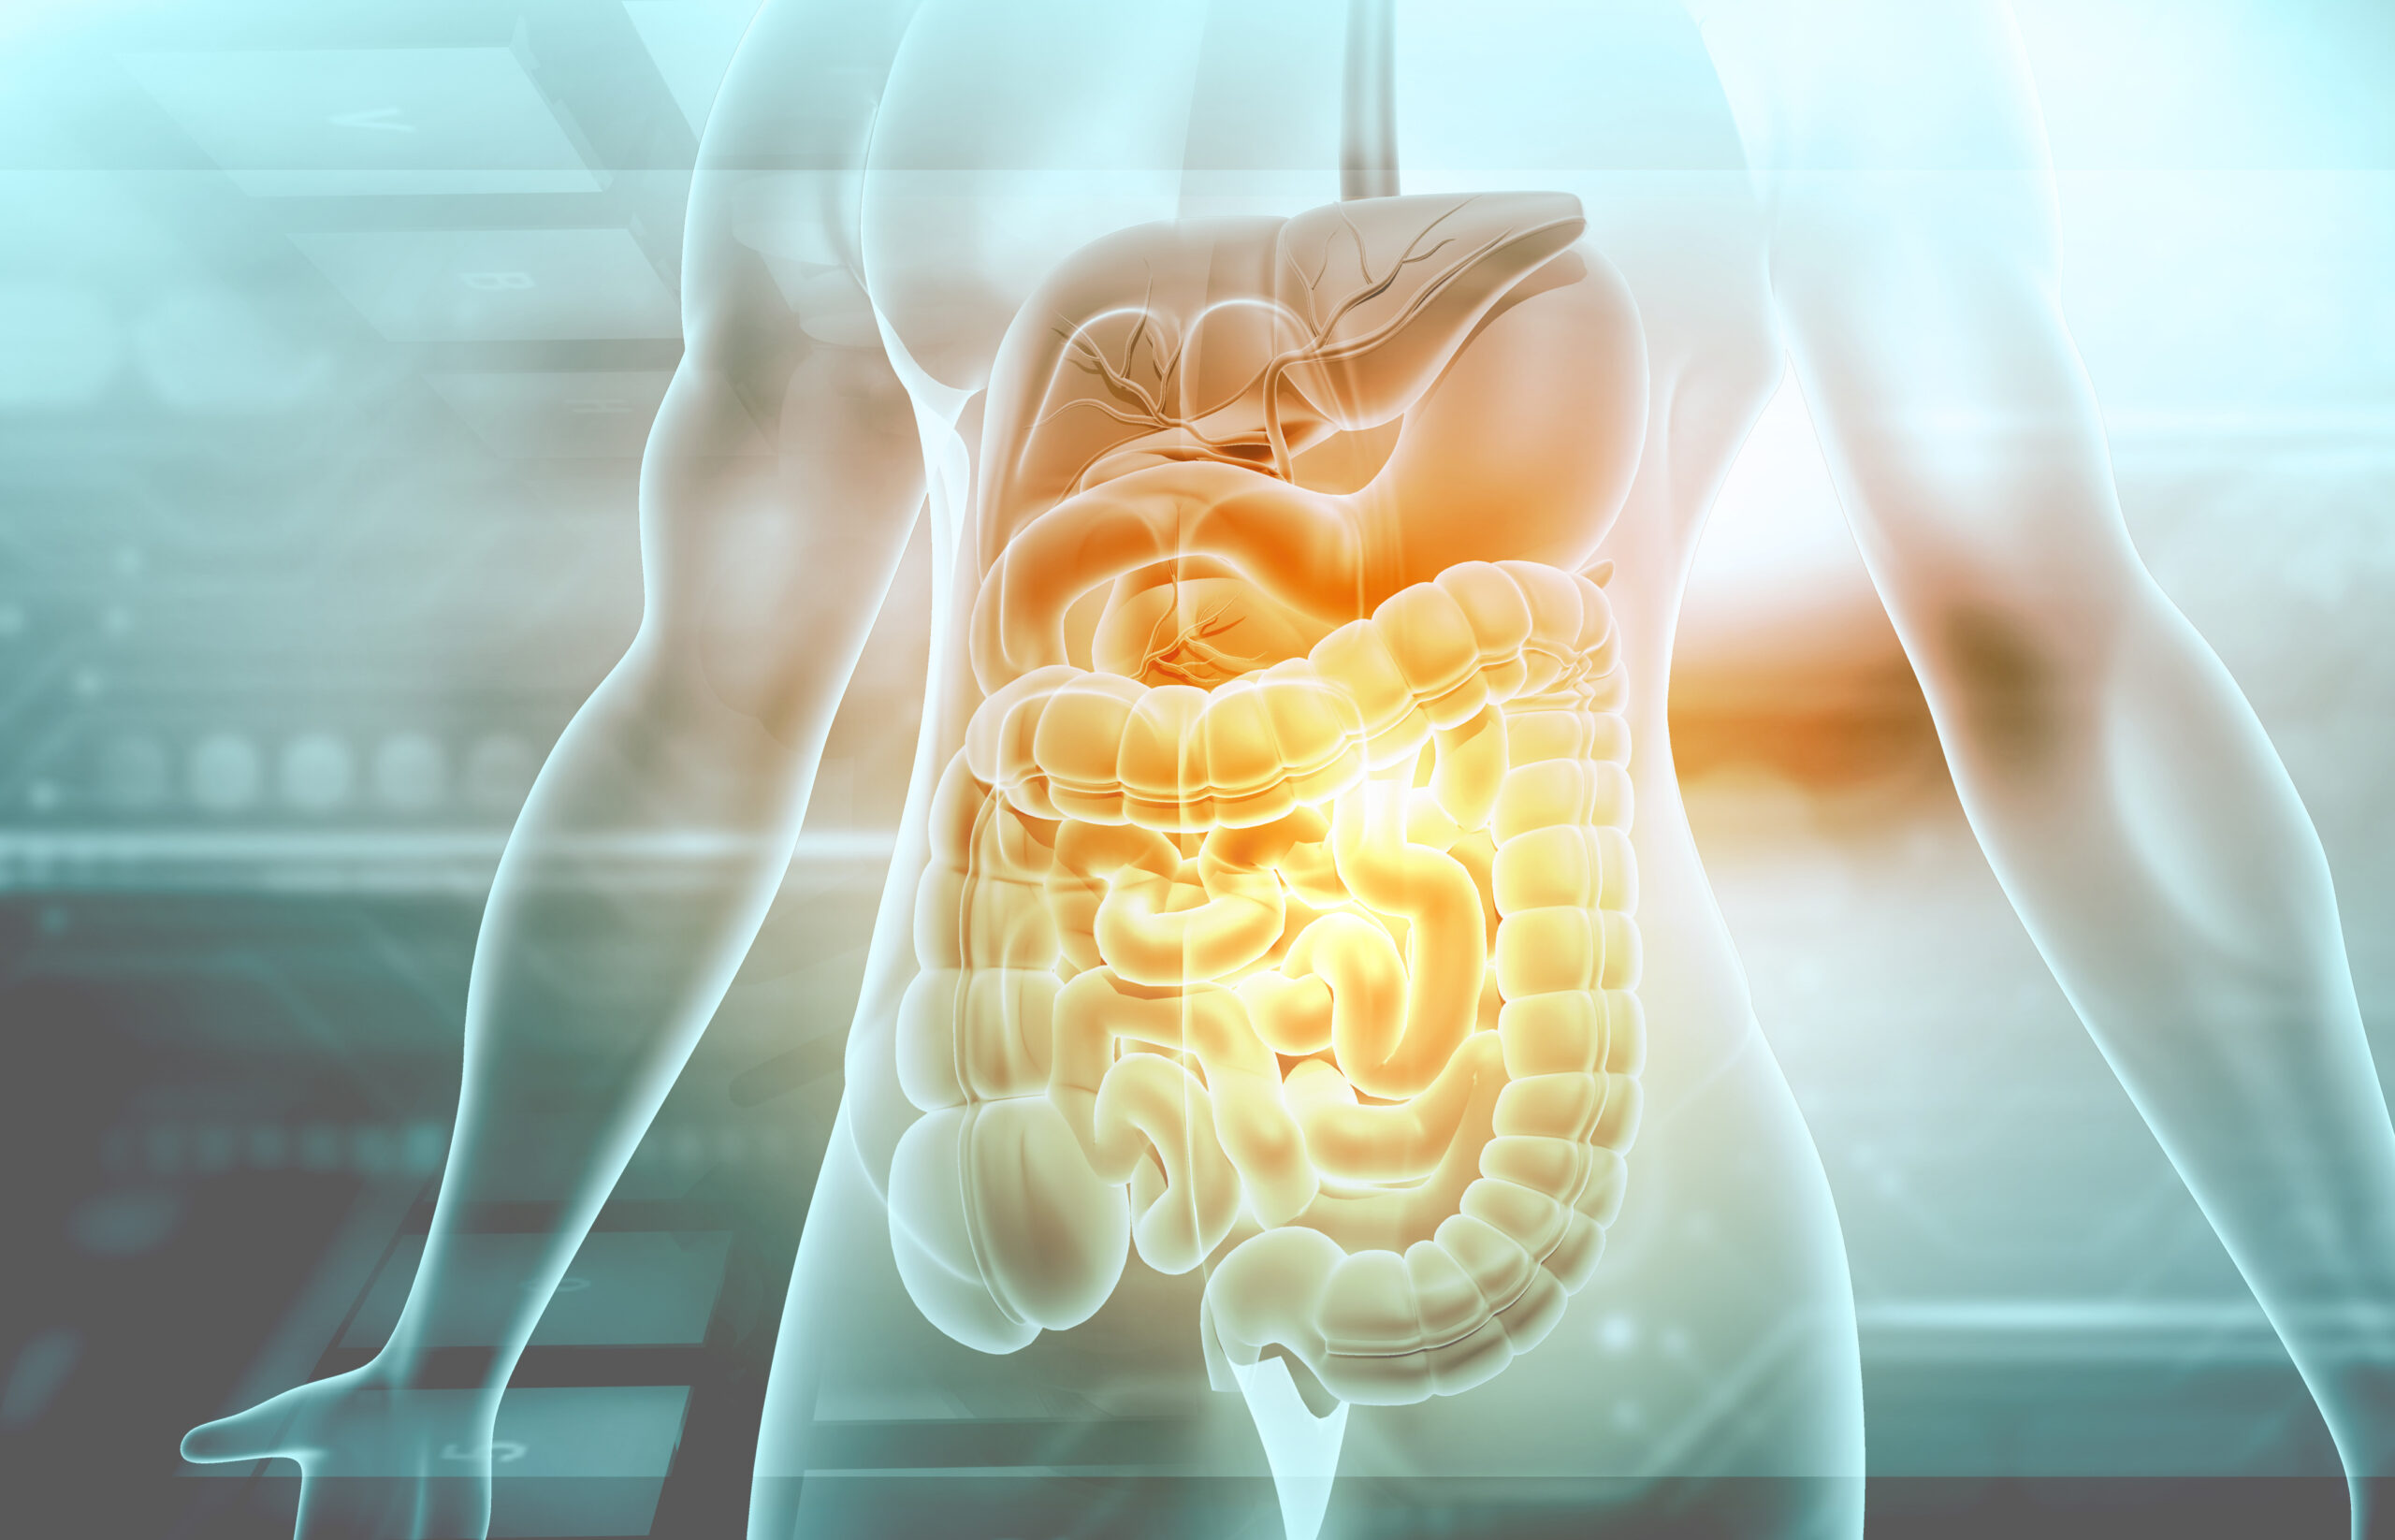 A graphic concept image detailing the silhouette of a person's torso. The gastrointestinal system is highlighted.